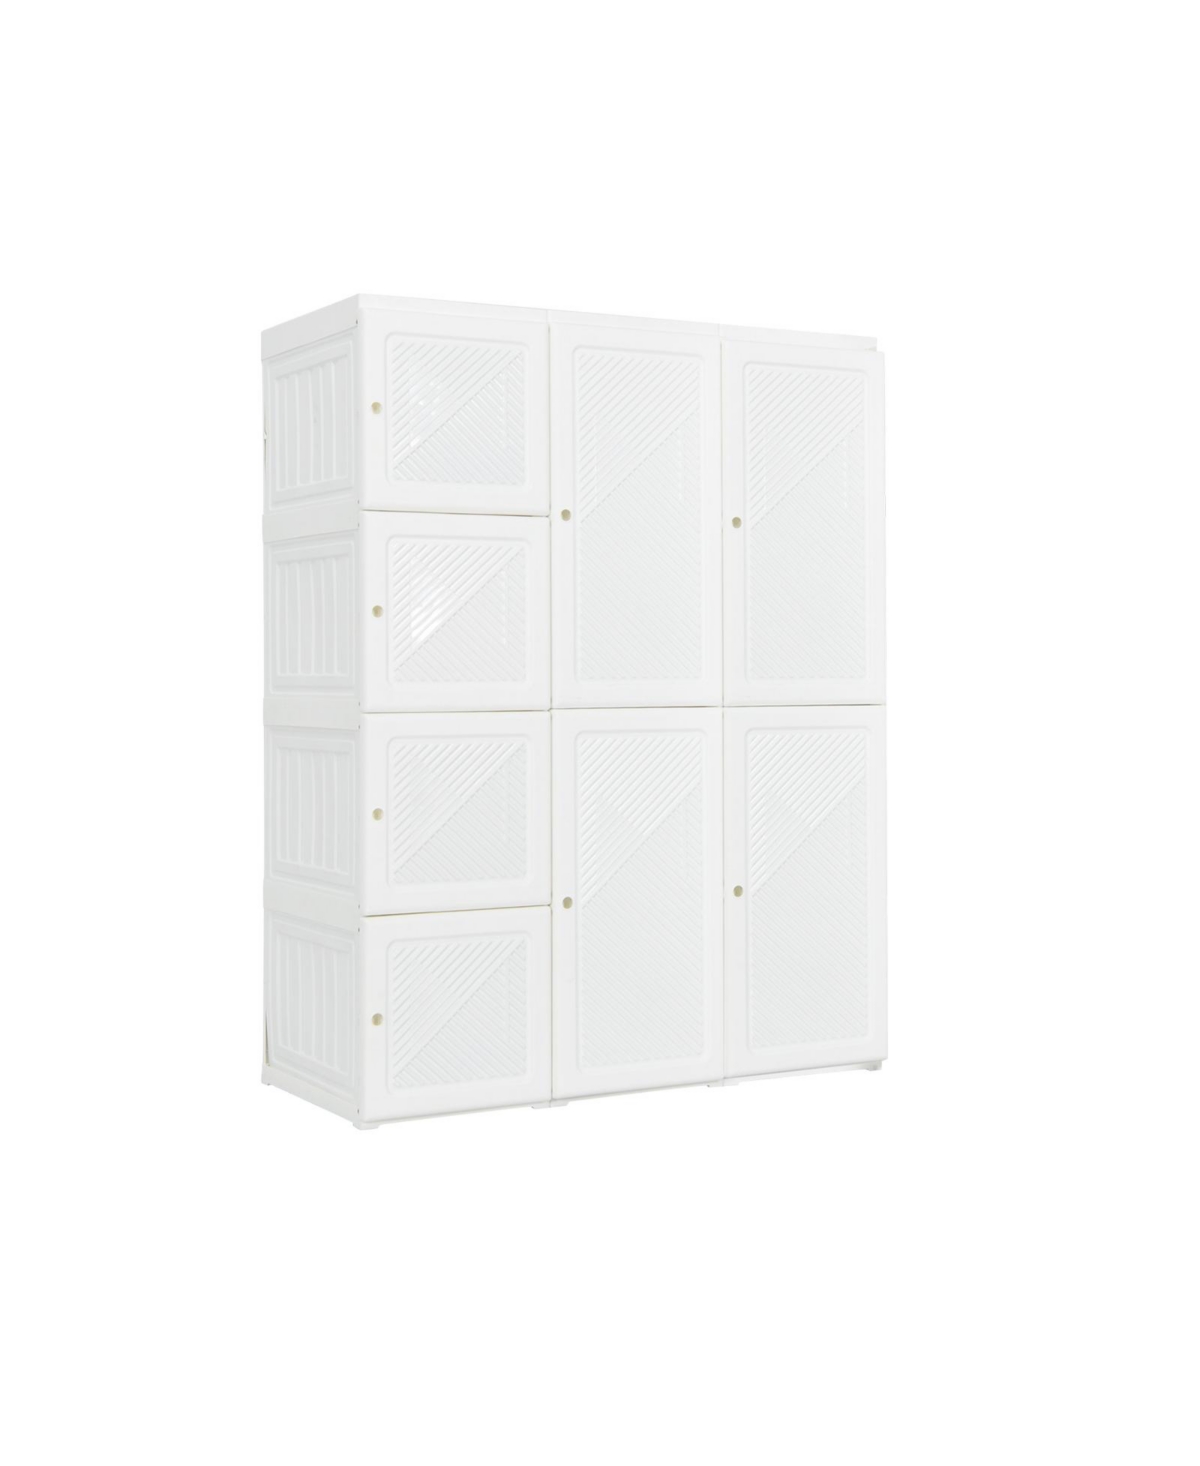 Clothes Foldable Armoire Wardrobe Closet with 12 Cubby Storage - White